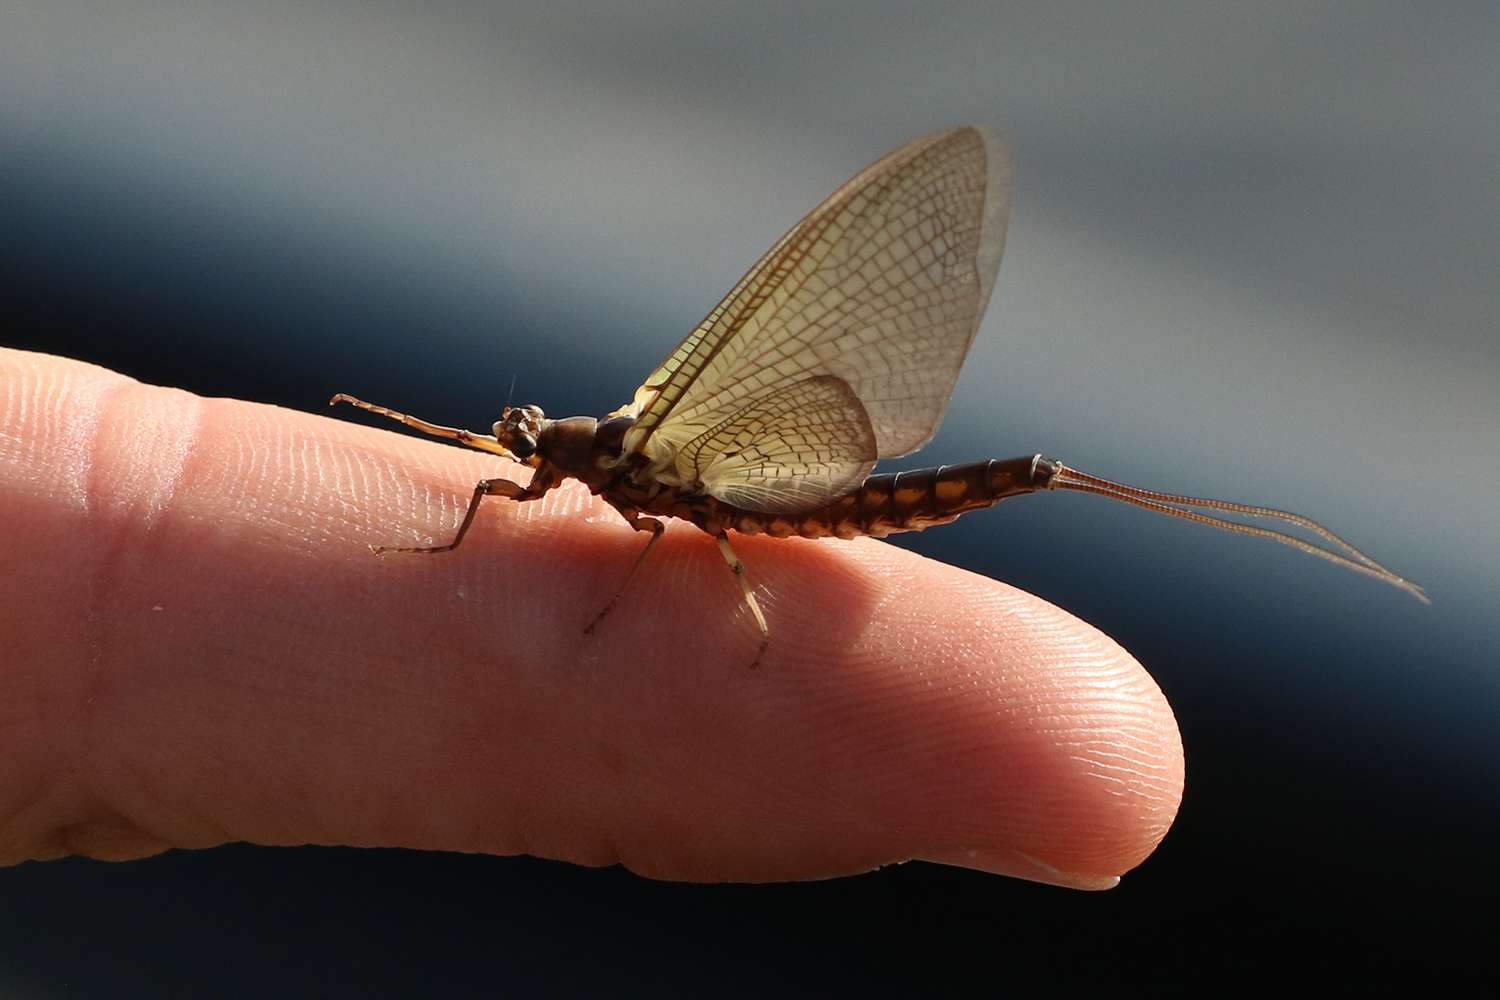 Bird food? This is a mayfly, which are known to hatch in extraordinary numbers along the Upper Mississippi River near LaCrosse, Wisc. Such large numbers that A) they show up on weather radars and B) they break out the snow plows to push them off the roads after they die in piles. It's an impressive phenomenon in that part of the country. 